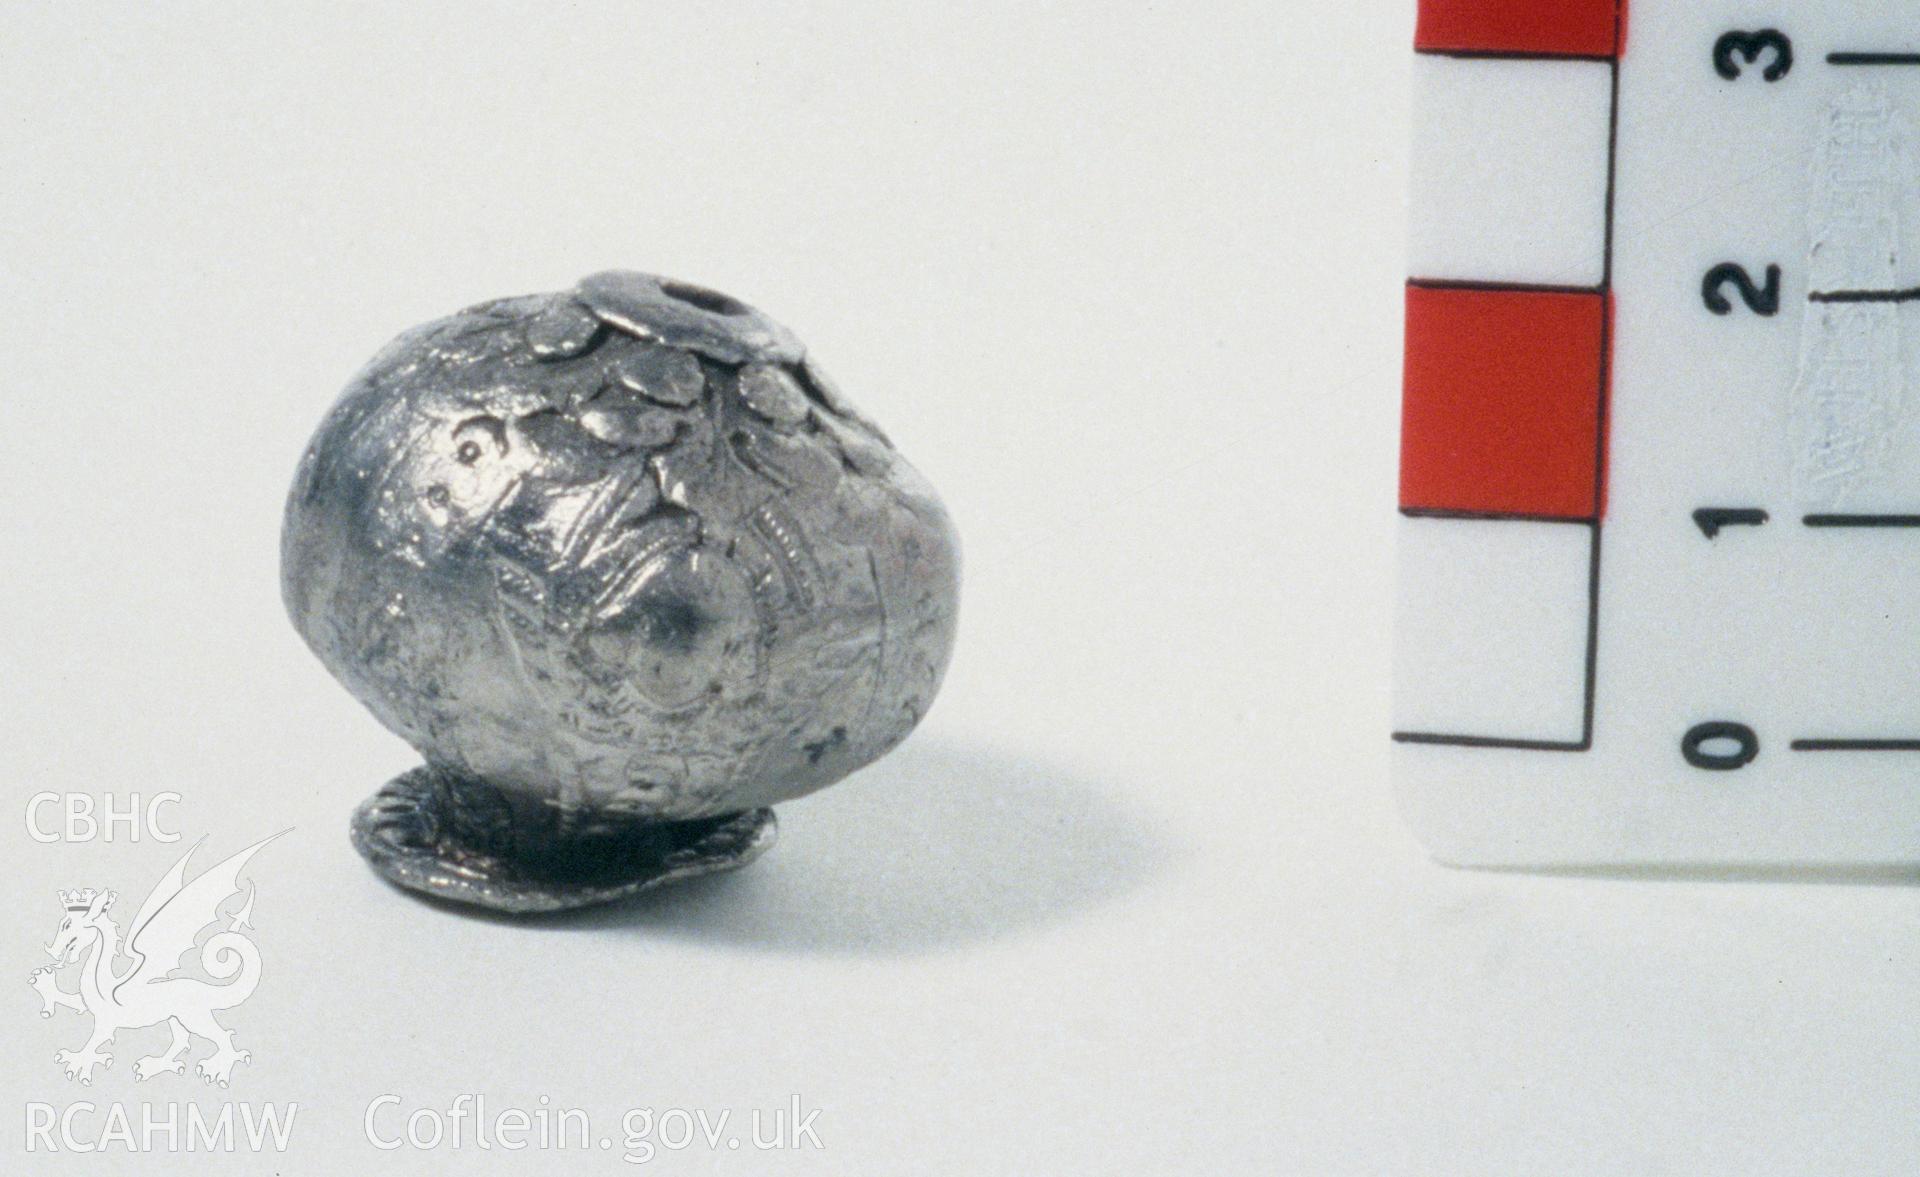 Colour slide showing find, possibly a pommel, from a survey of the Mary designated shipwreck, courtesy of National Museums, Liverpool (Merseyside Maritime Museum)